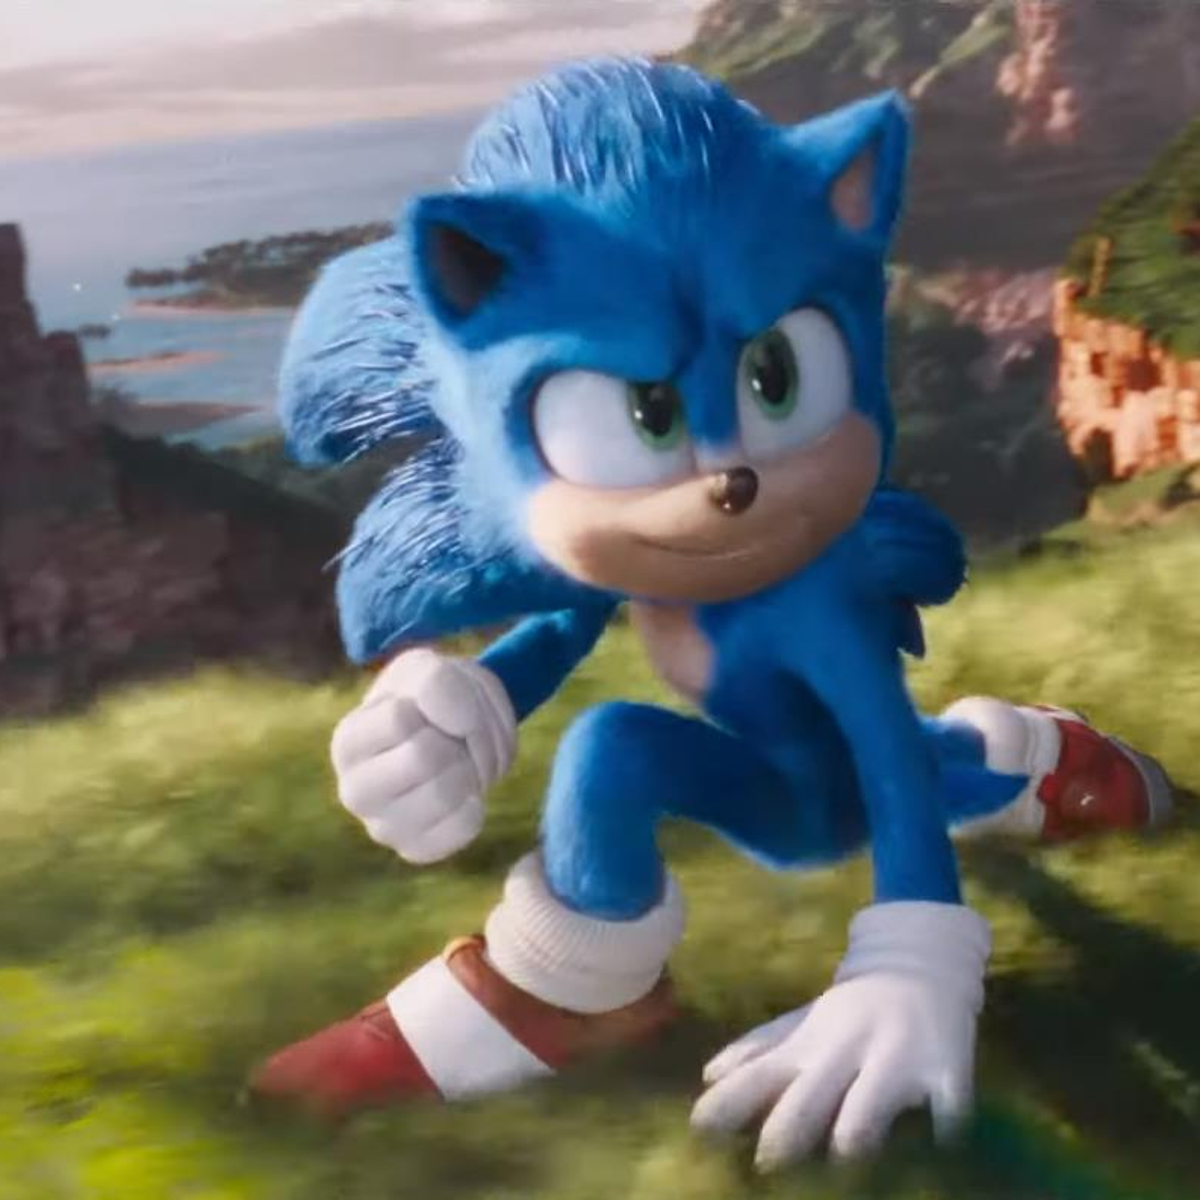 Sonic the Hedgehog 3: Which Game Character Tails Actress Wants Adapted